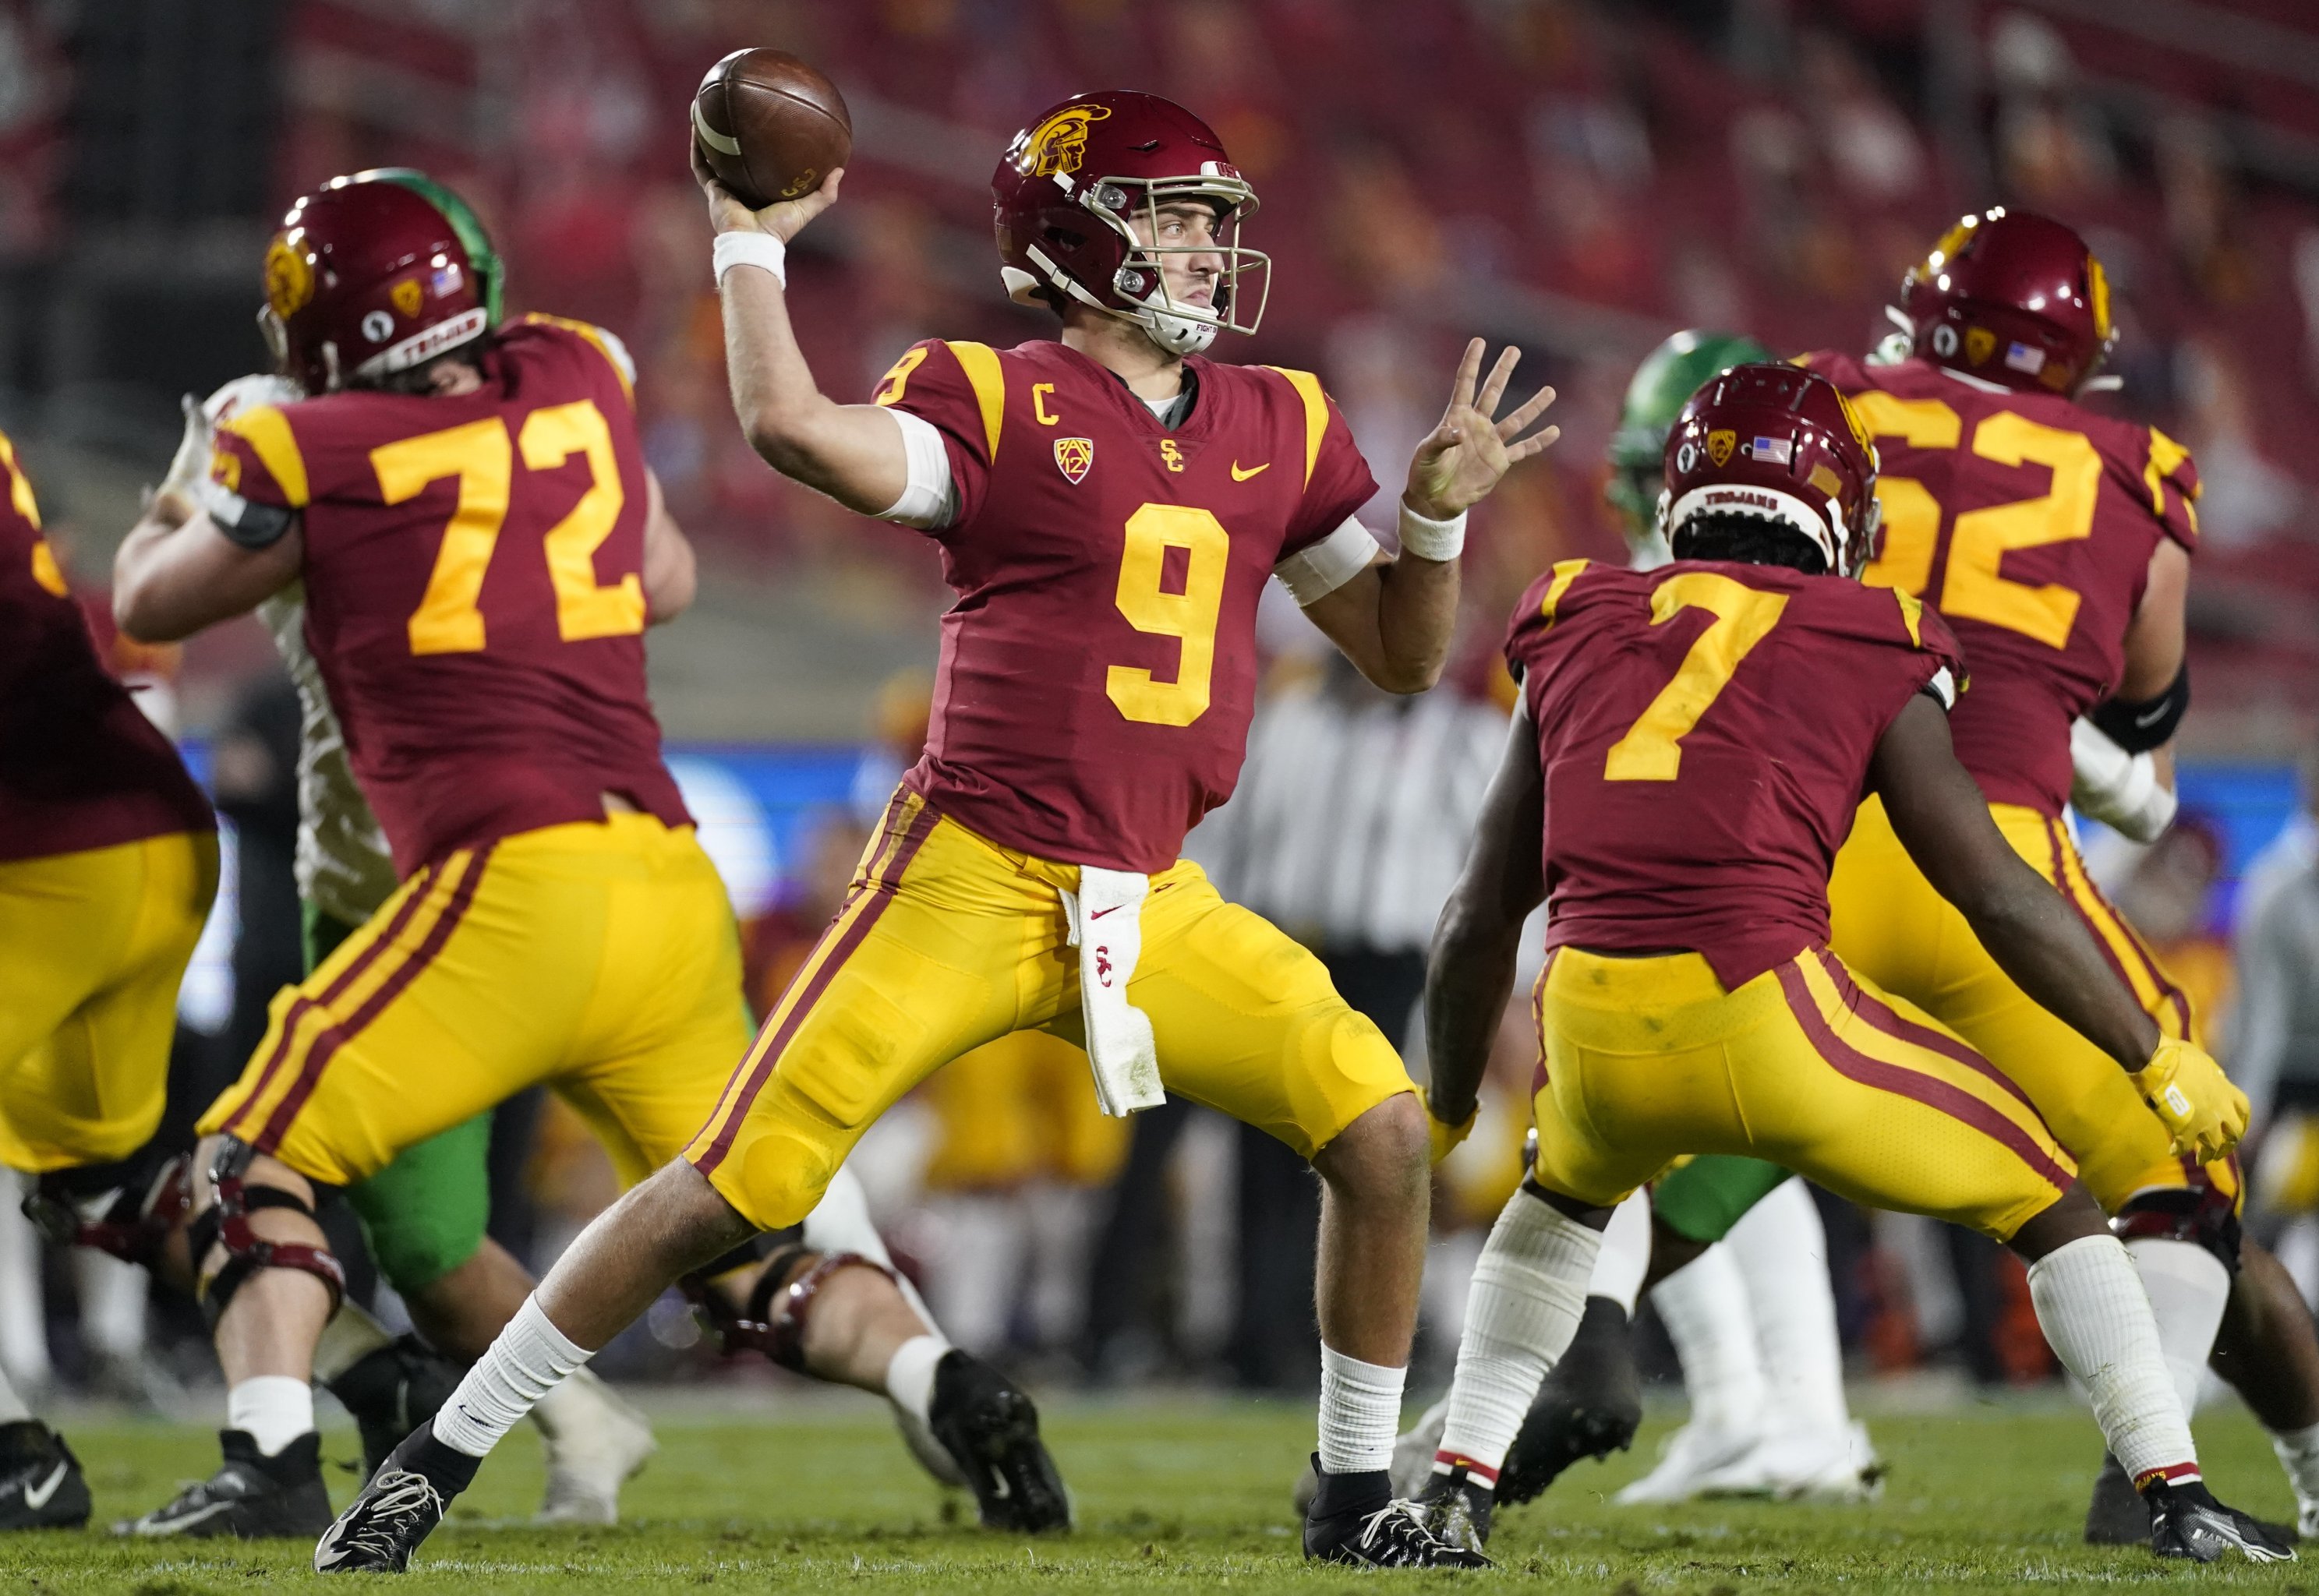 USC Spring Game 2021: Top Storylines and Prospects to Watch